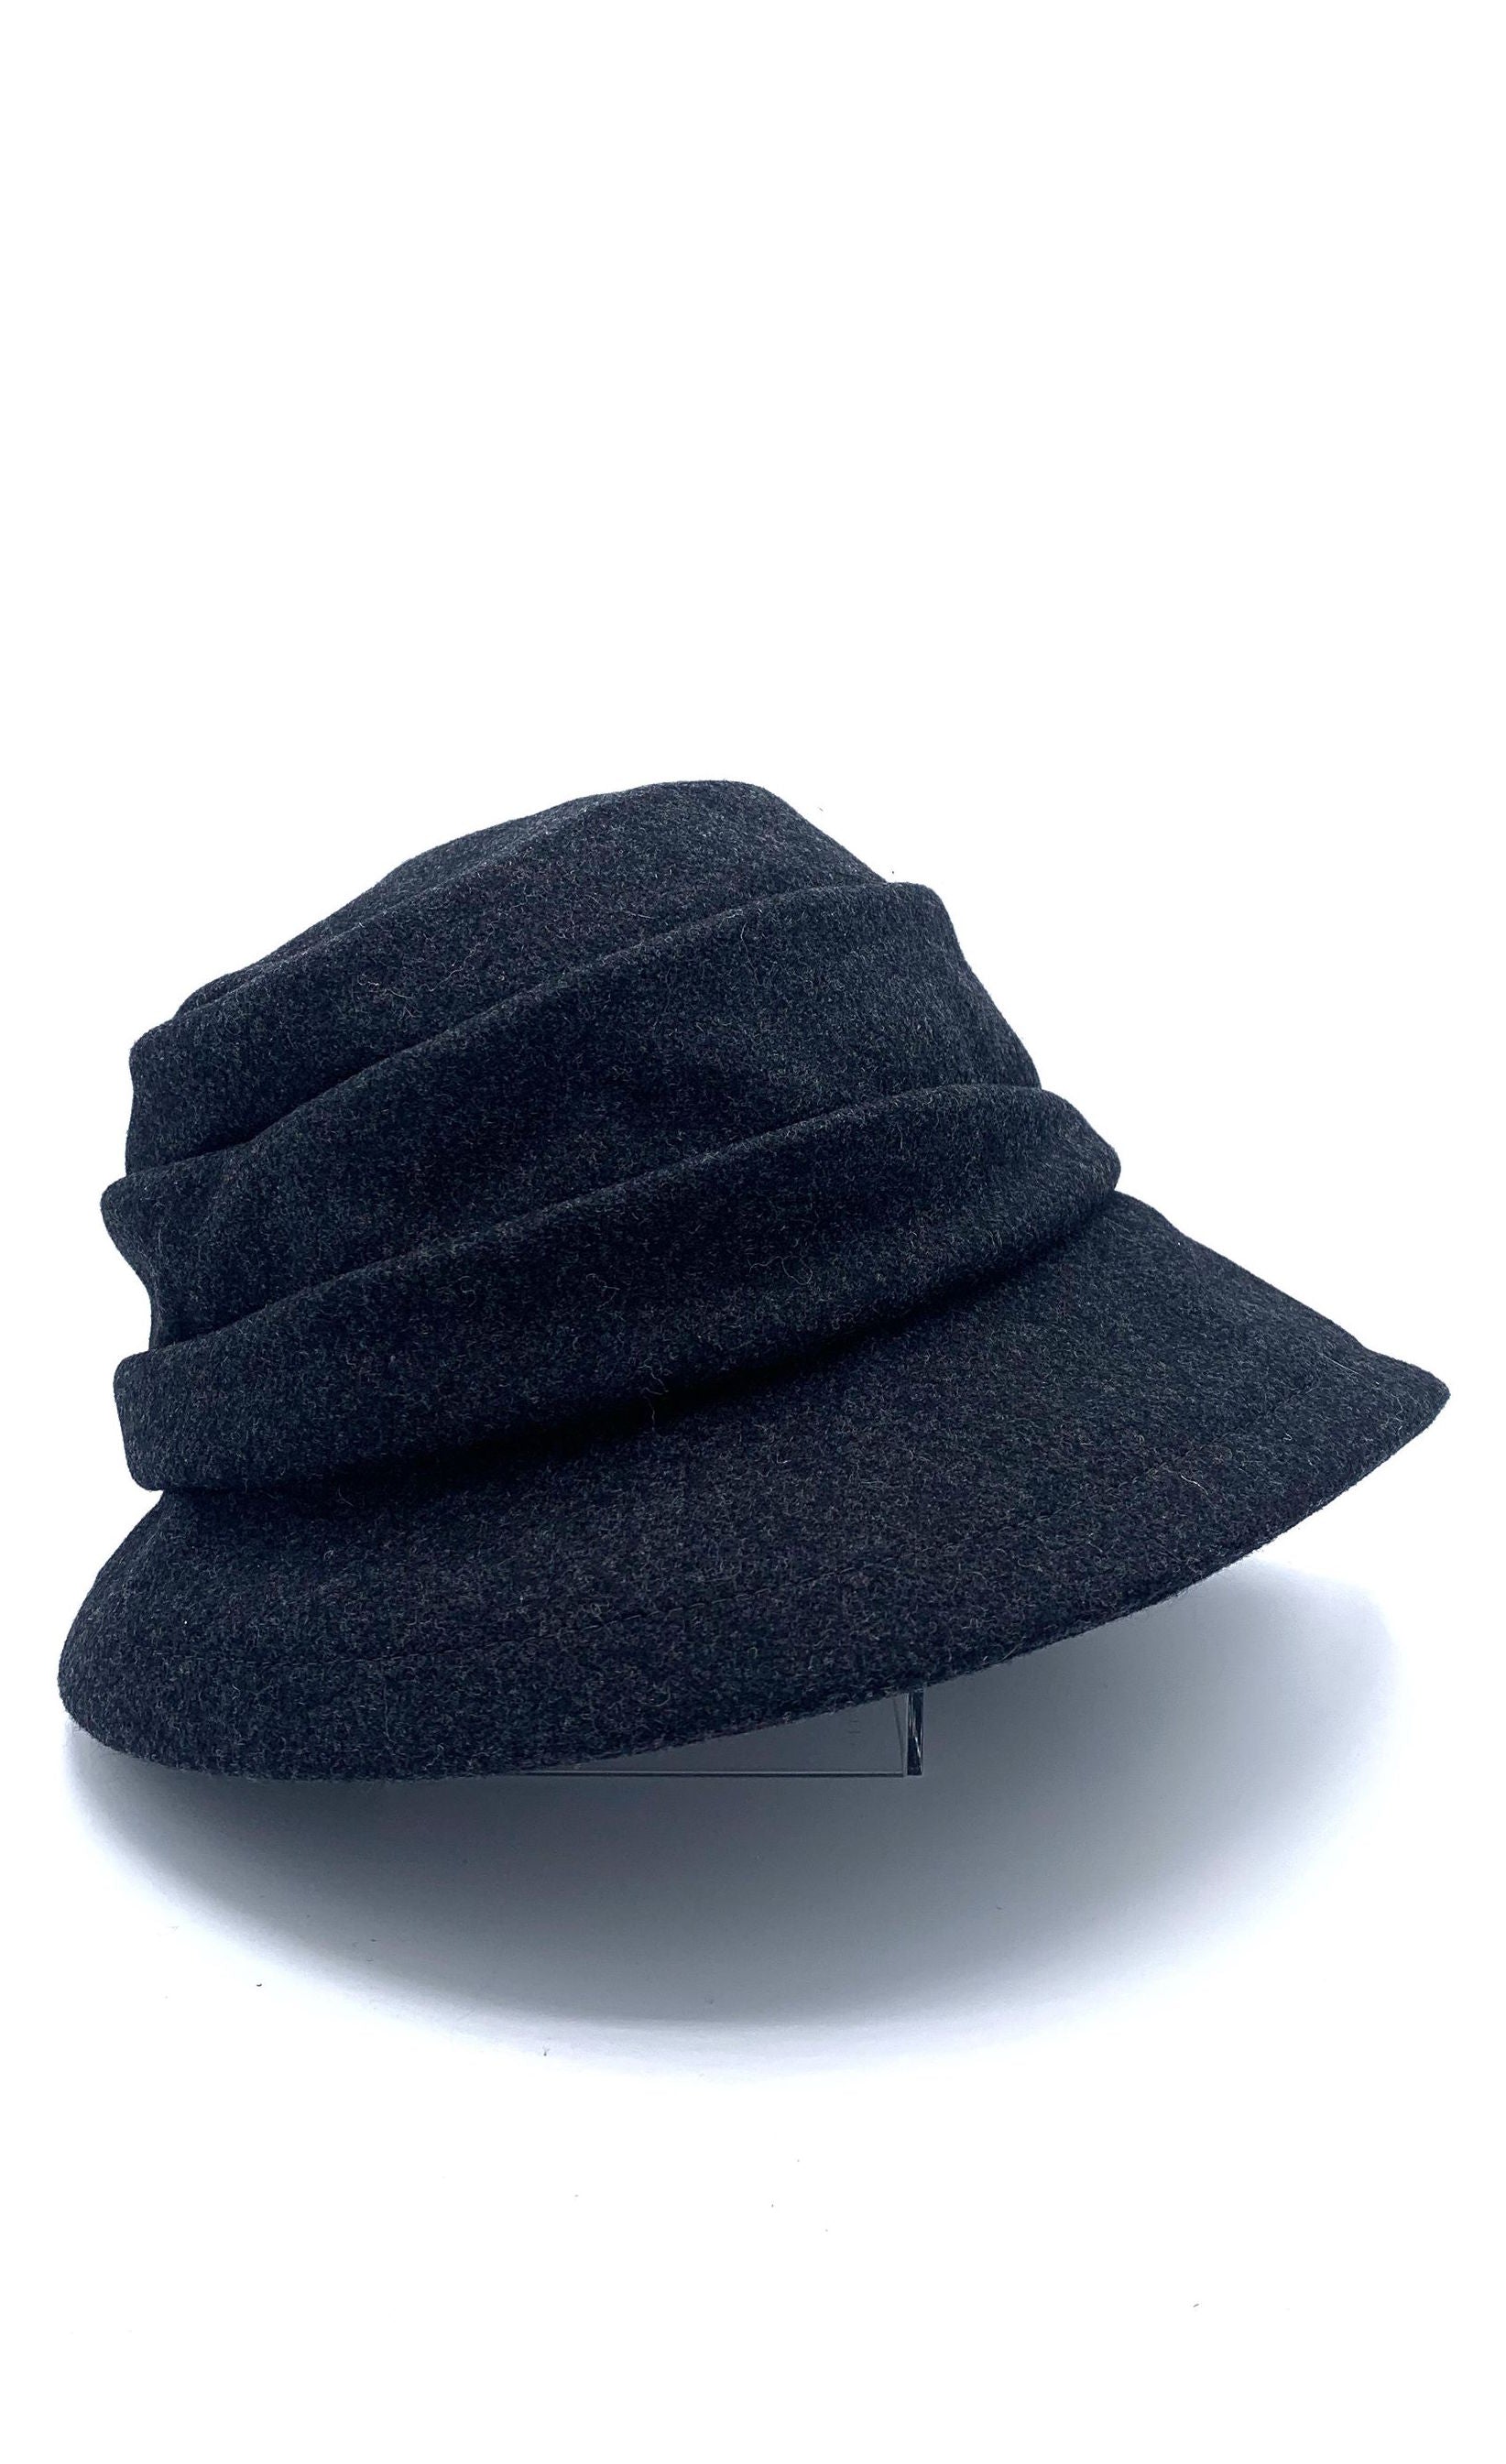 Right side view of the lillie & cohoe midnight phoebe wool classic hat. This hat has a tiered/layered crown and an asymmetrical brim that points to the left.